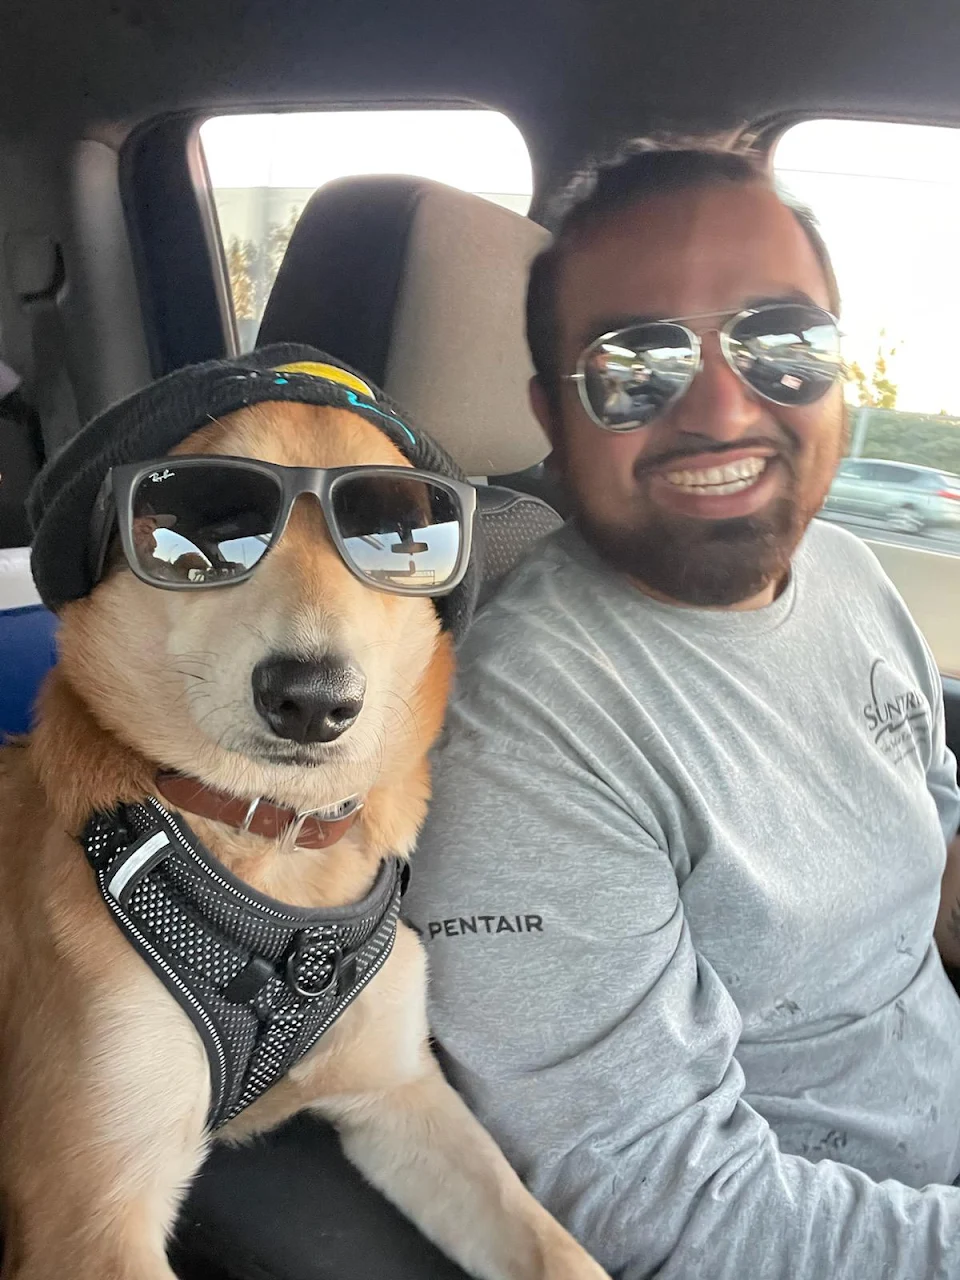 Me and My Best Friend Enjoying a Ride